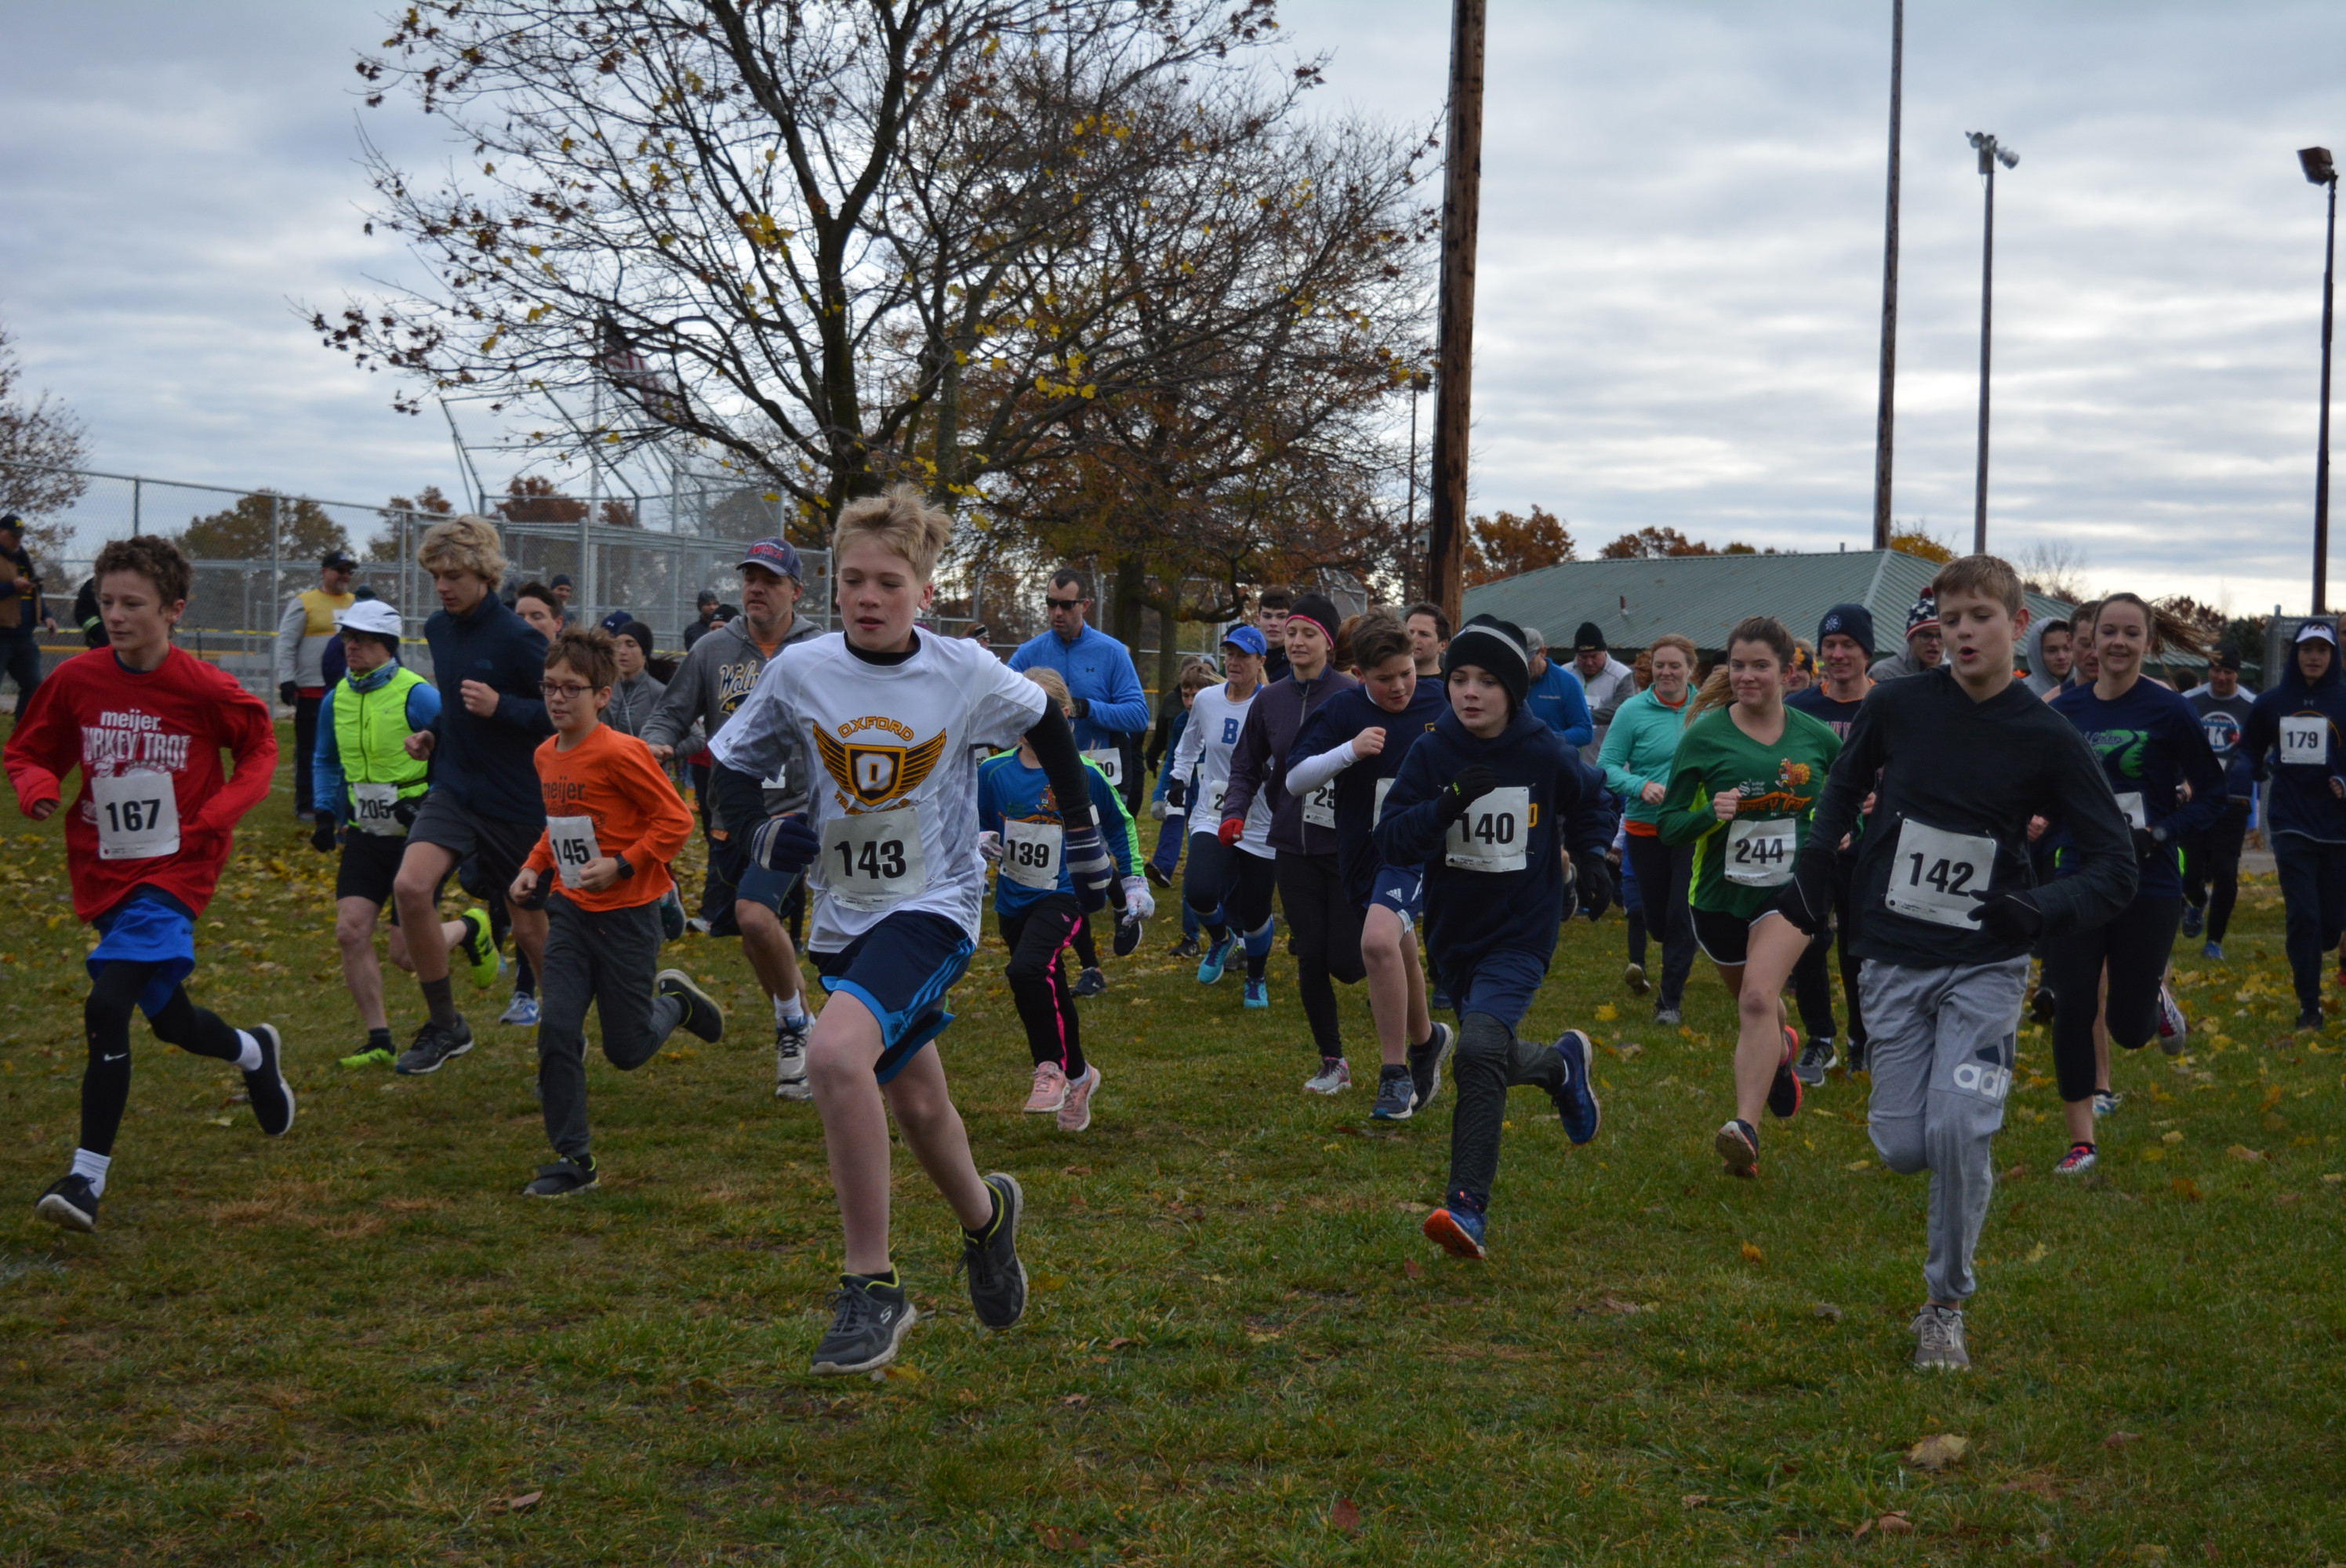 The Turkey Trotters take off from the starting line. Photo by C.J. Carnacchio.